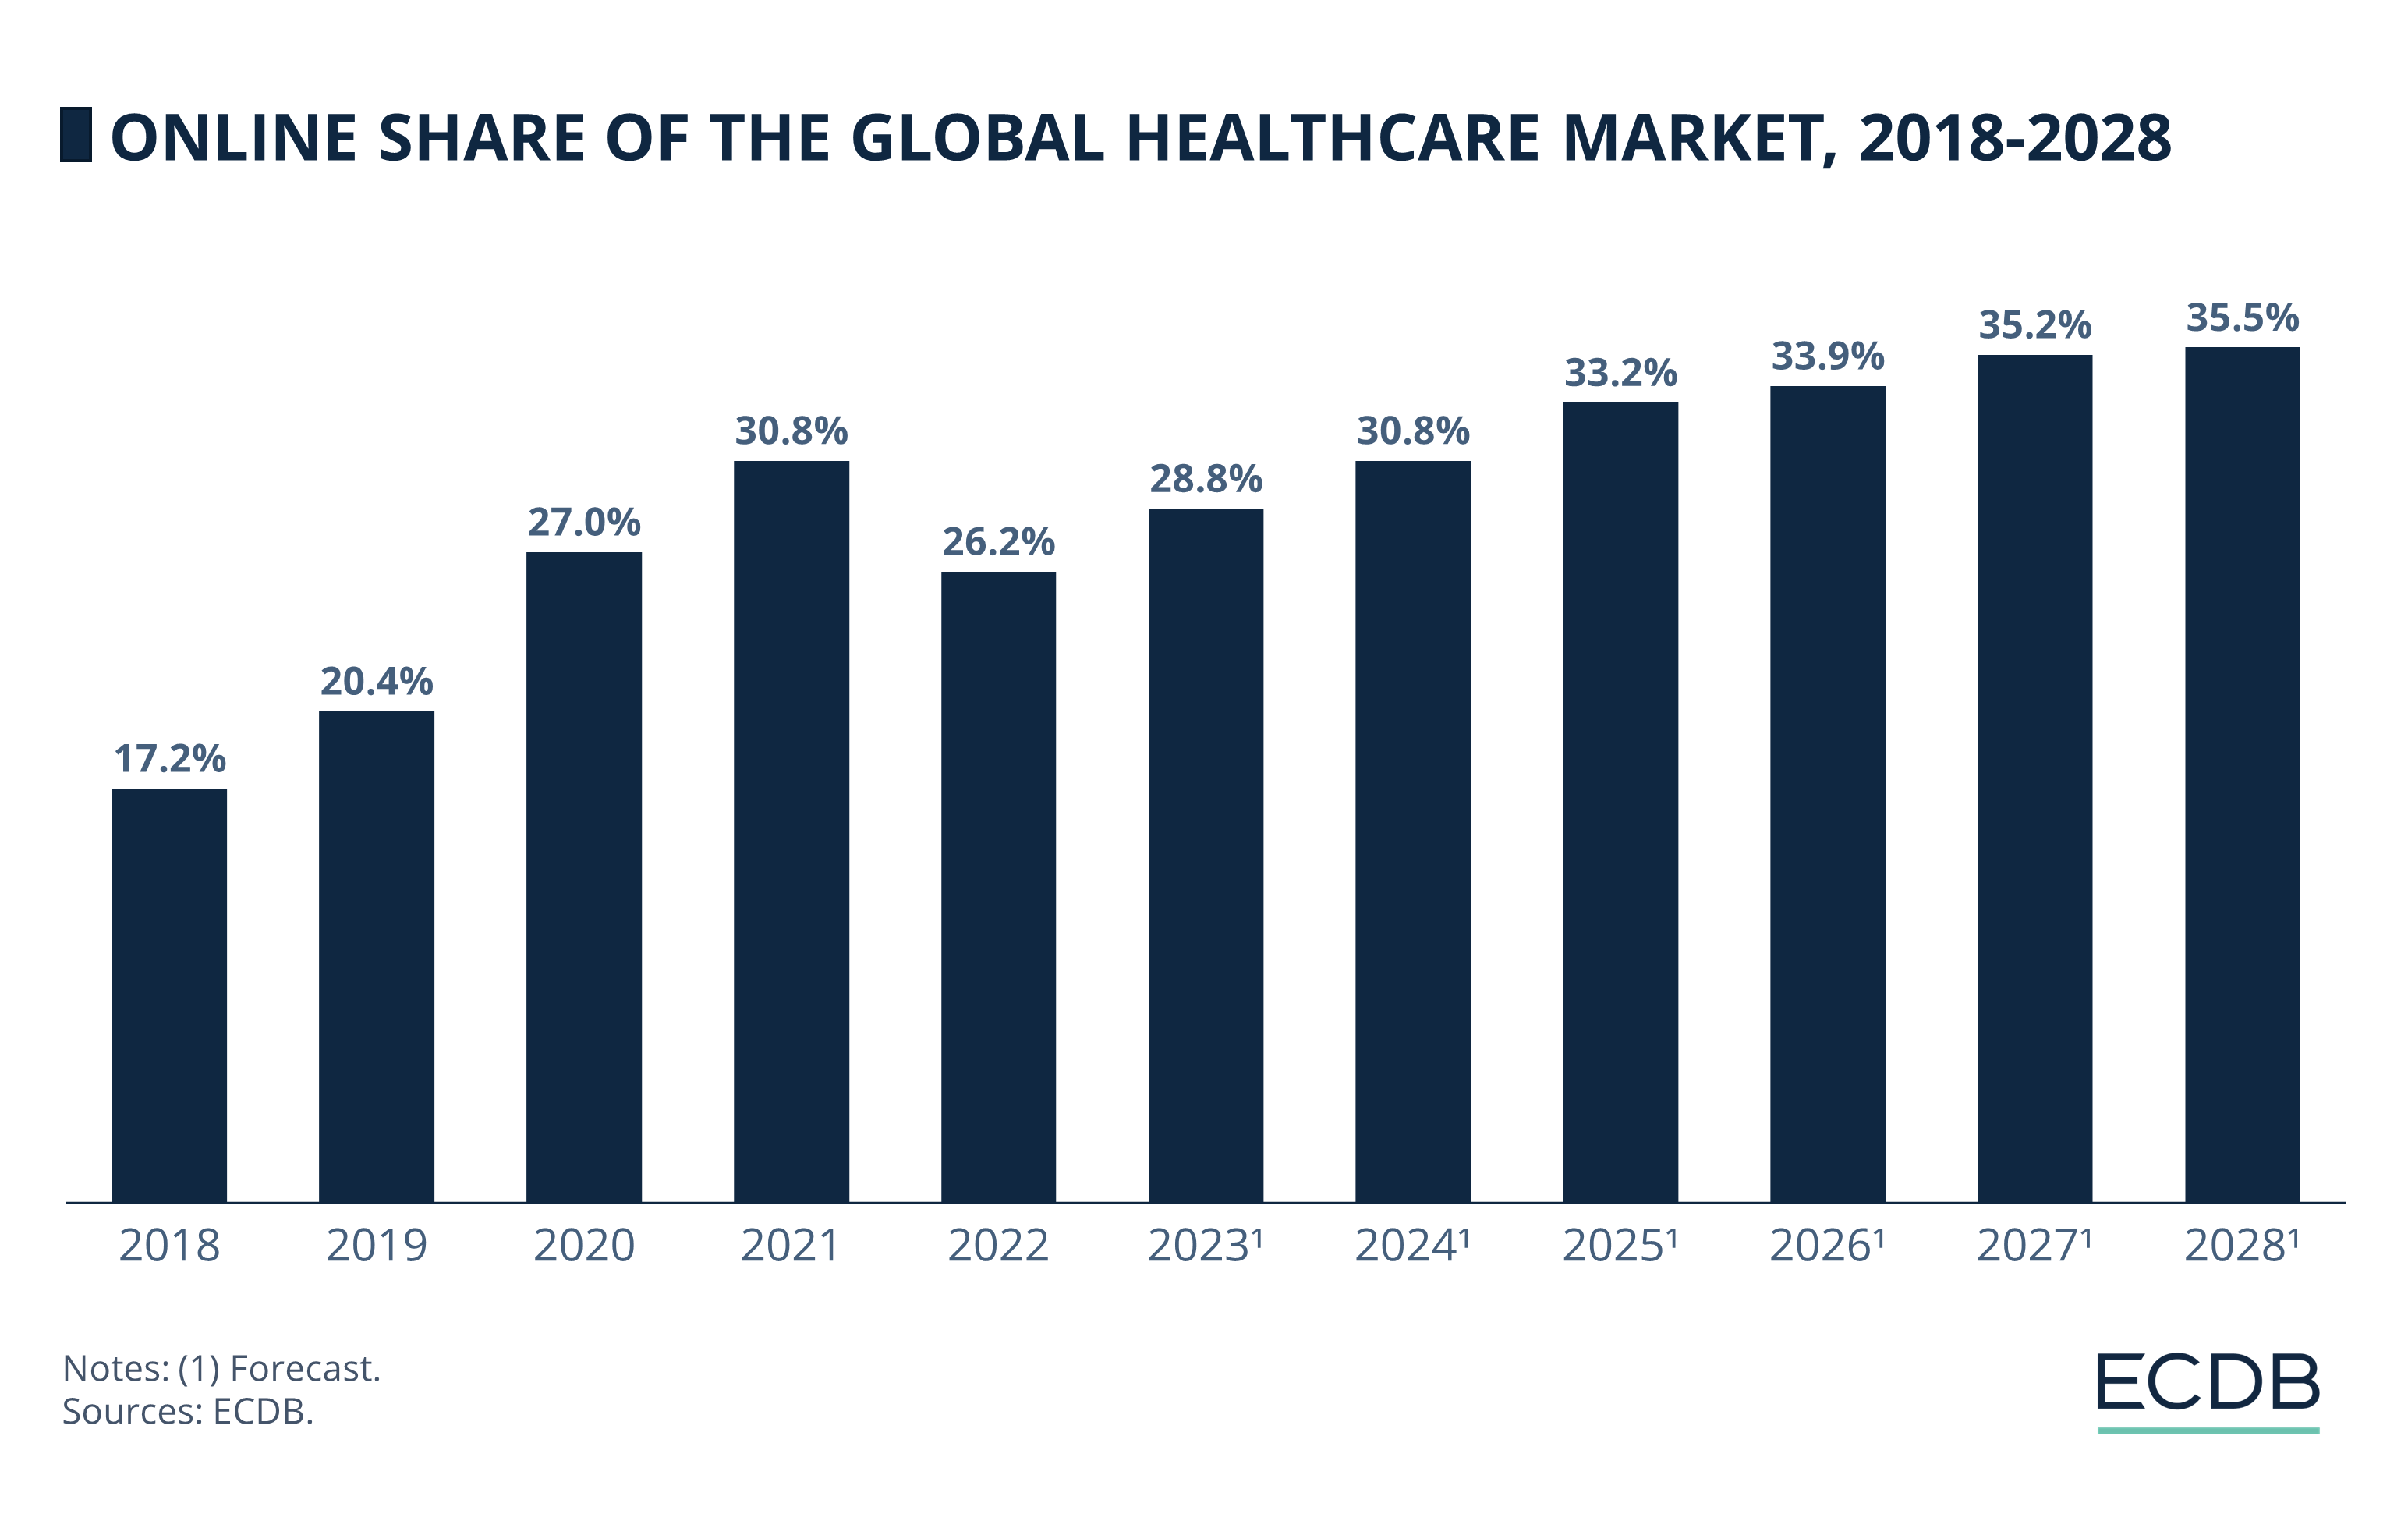 Online Share of the Global Healthcare Market, 2018-2028